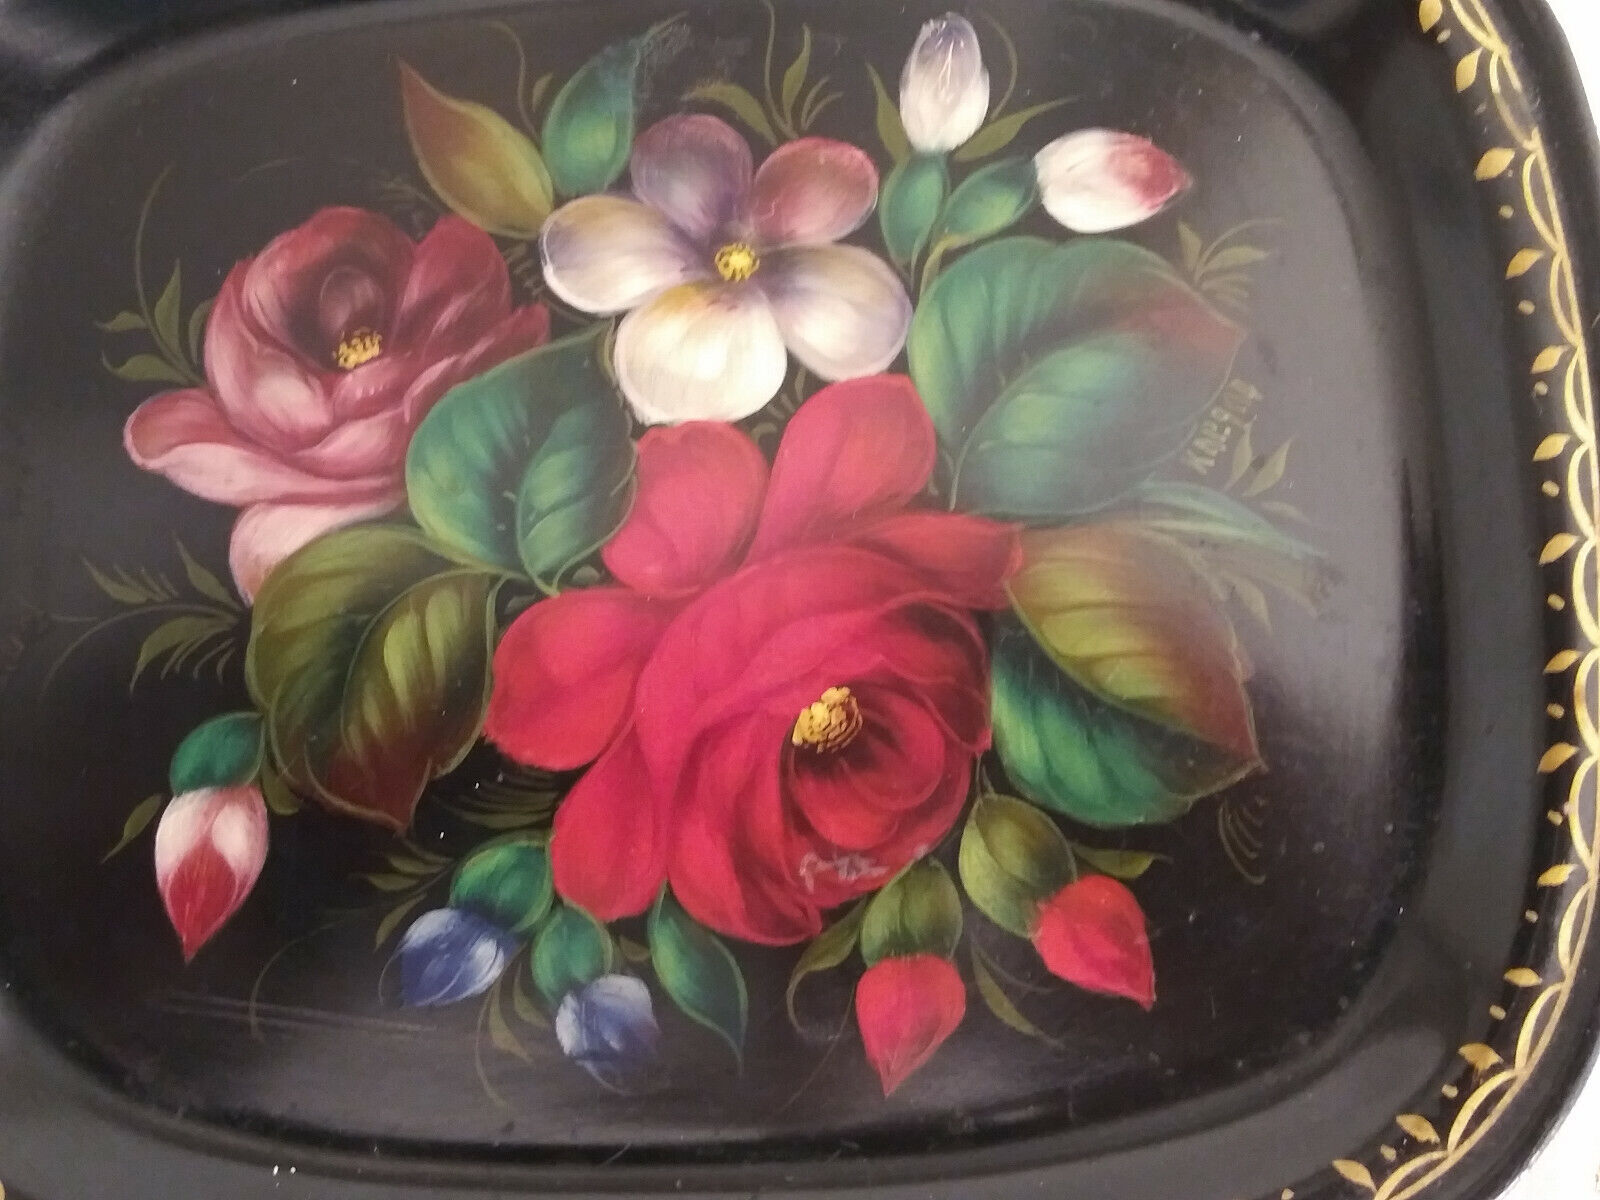 Vintage Zhostovo Tray Hand Painted with bright flowers - Souvenir from Russia